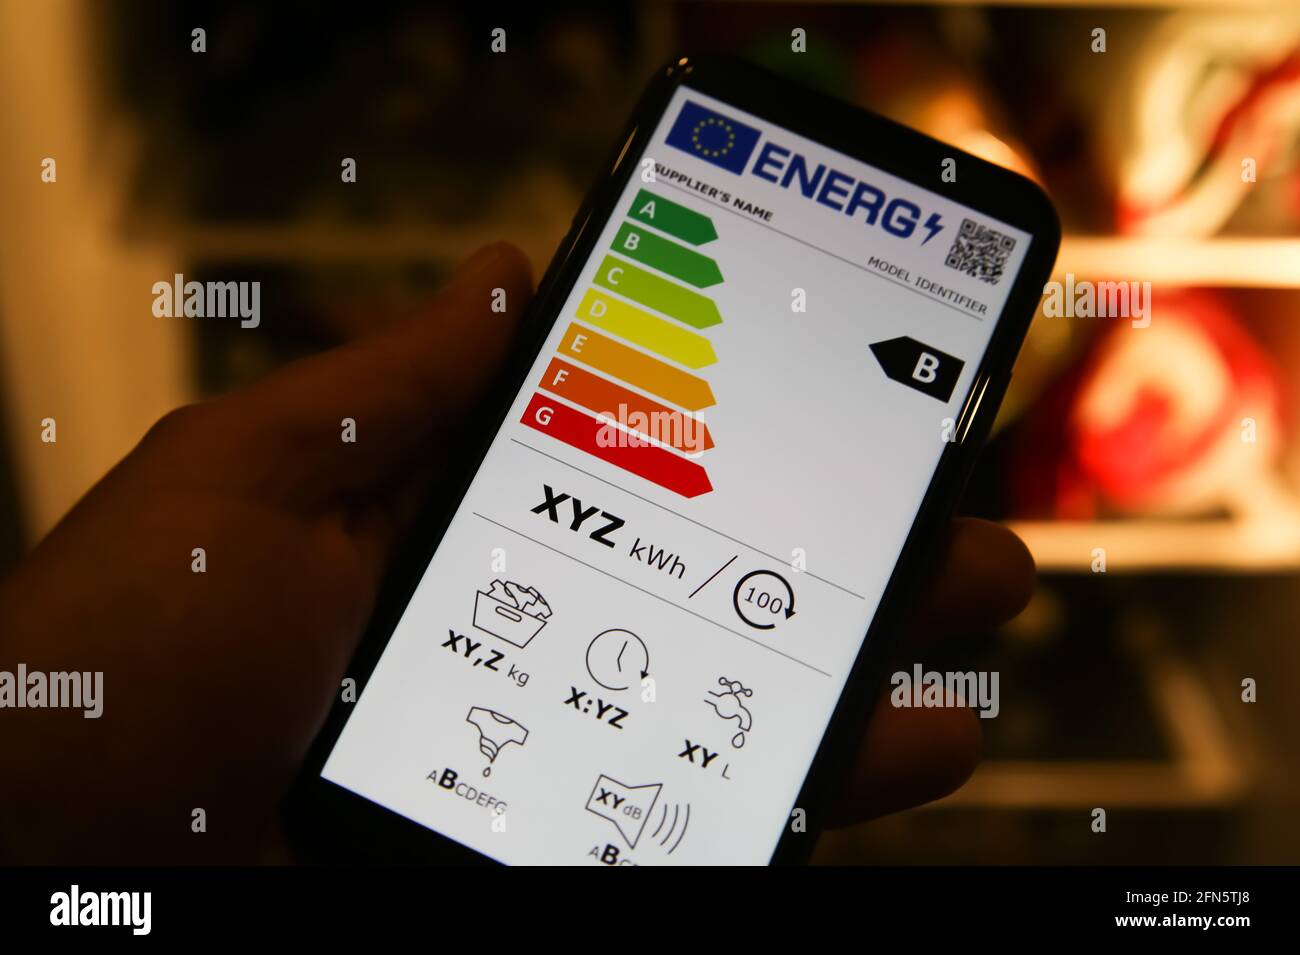 Viresen, Germany - May 8. 2021: Closeup of mobile phone screen with new european union energy label efficiency classes A - D, blurred fridge backgound Stock Photo